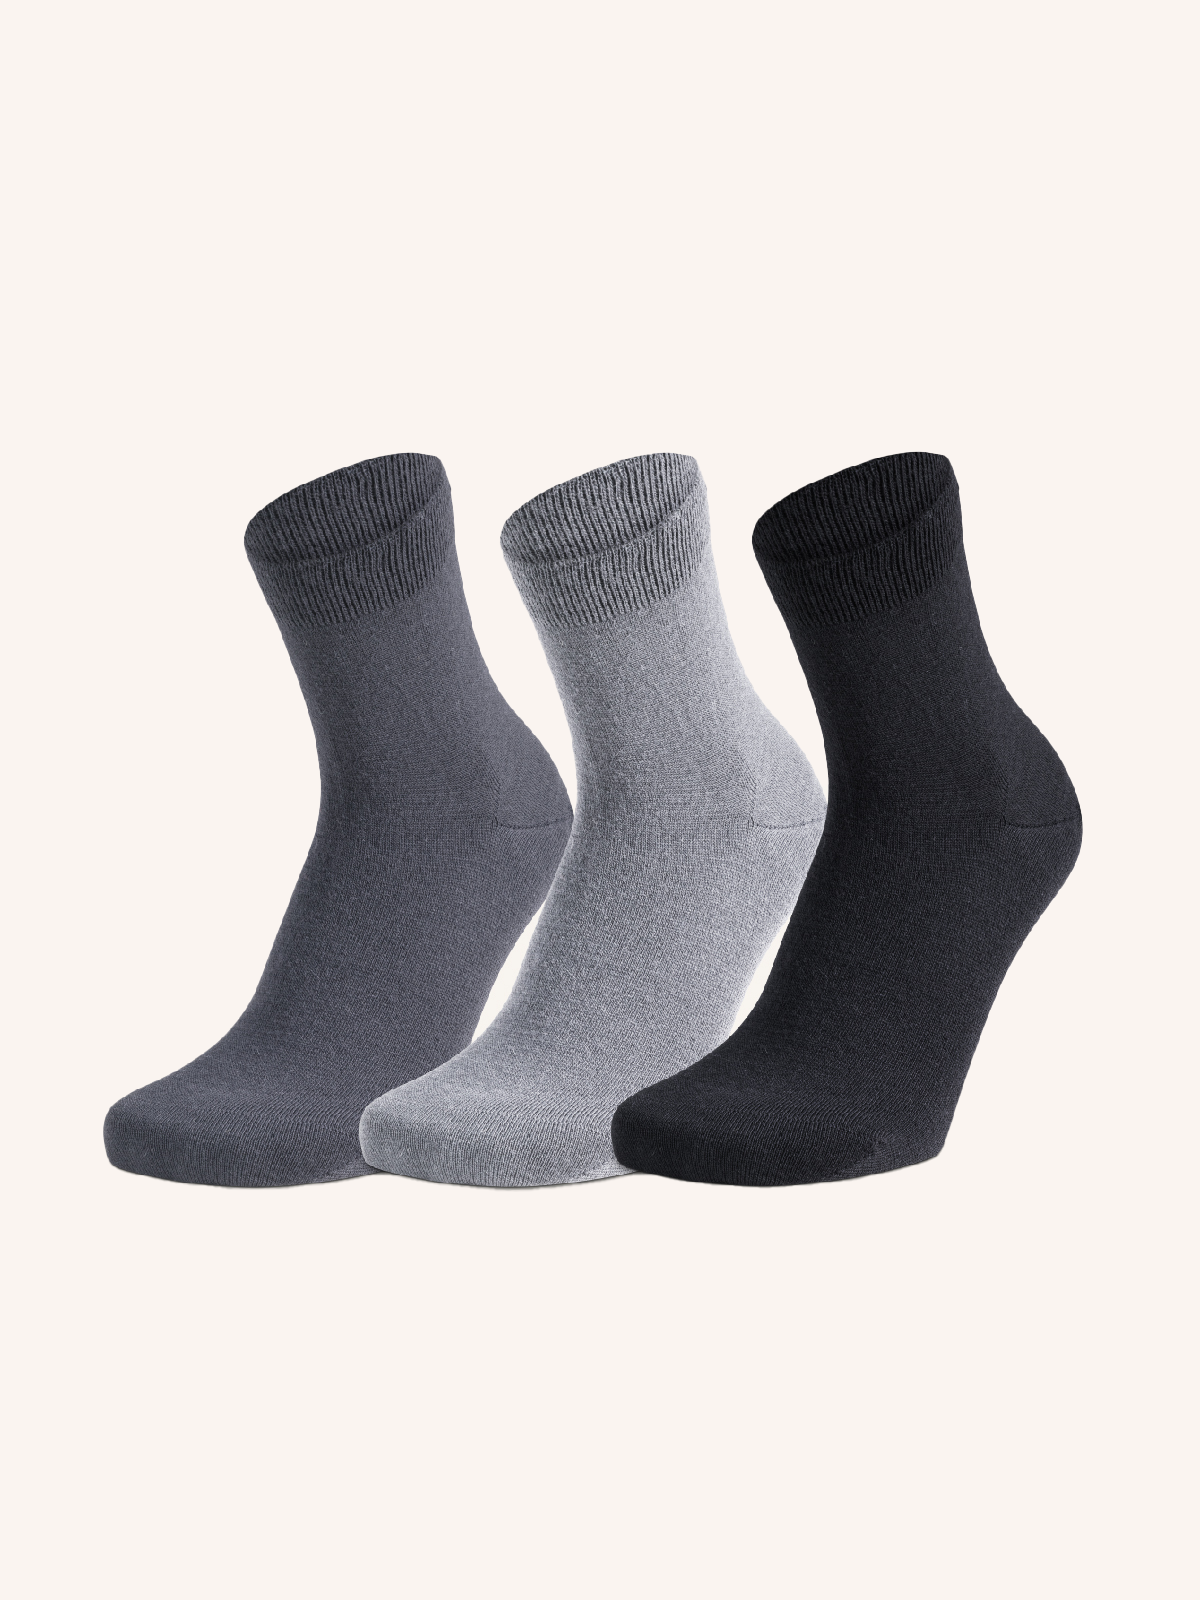 Short Wool Socks for Women | Plain Color | Pack of 3 Pairs | Cool Wool DC